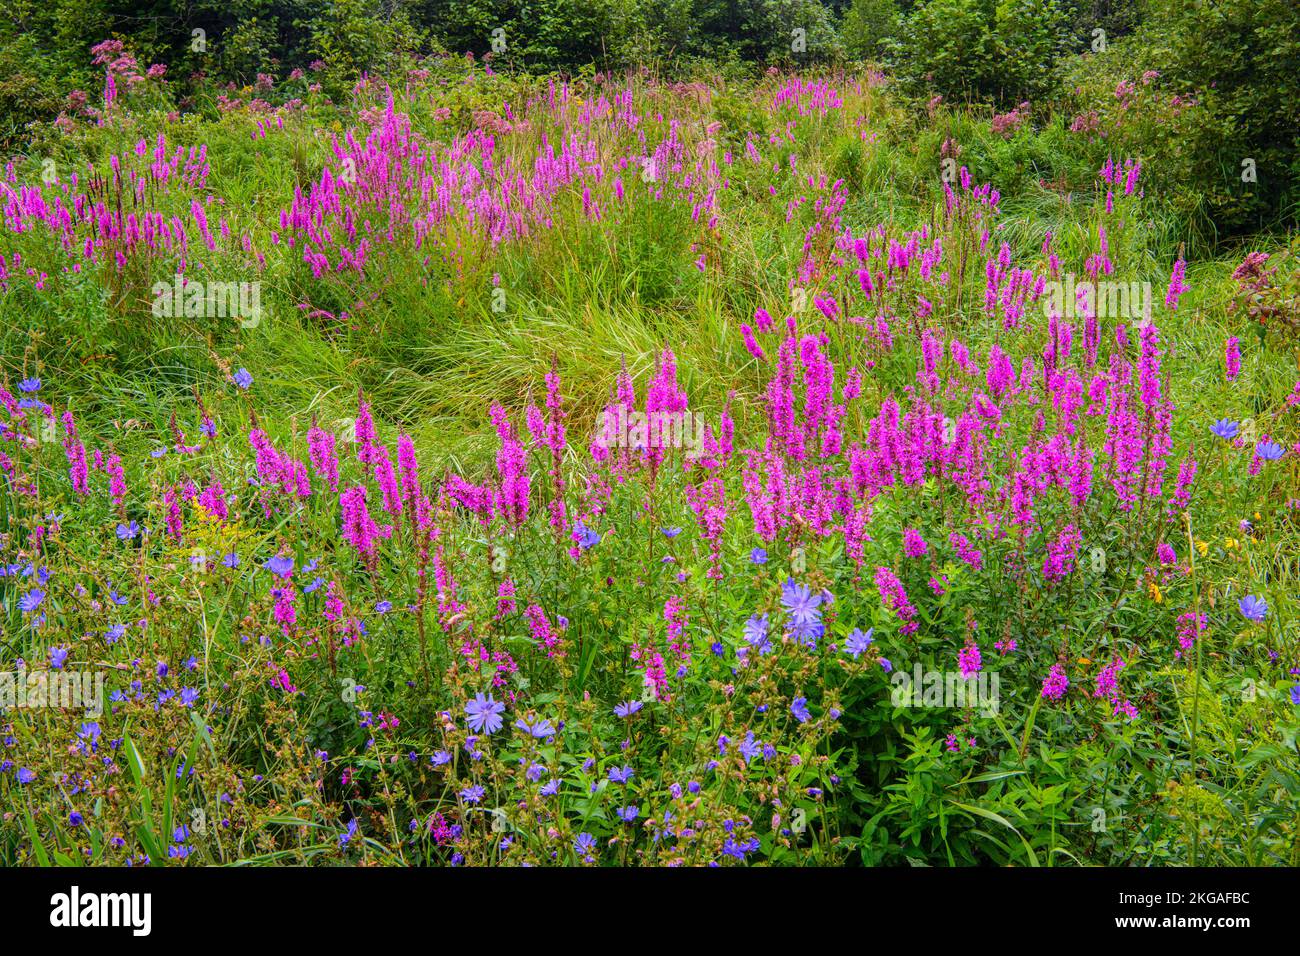 Native wildflowers and invasive purple loosestrife in late summer, Green Bay, Manitoulin Island, Ontario, Canada Stock Photo